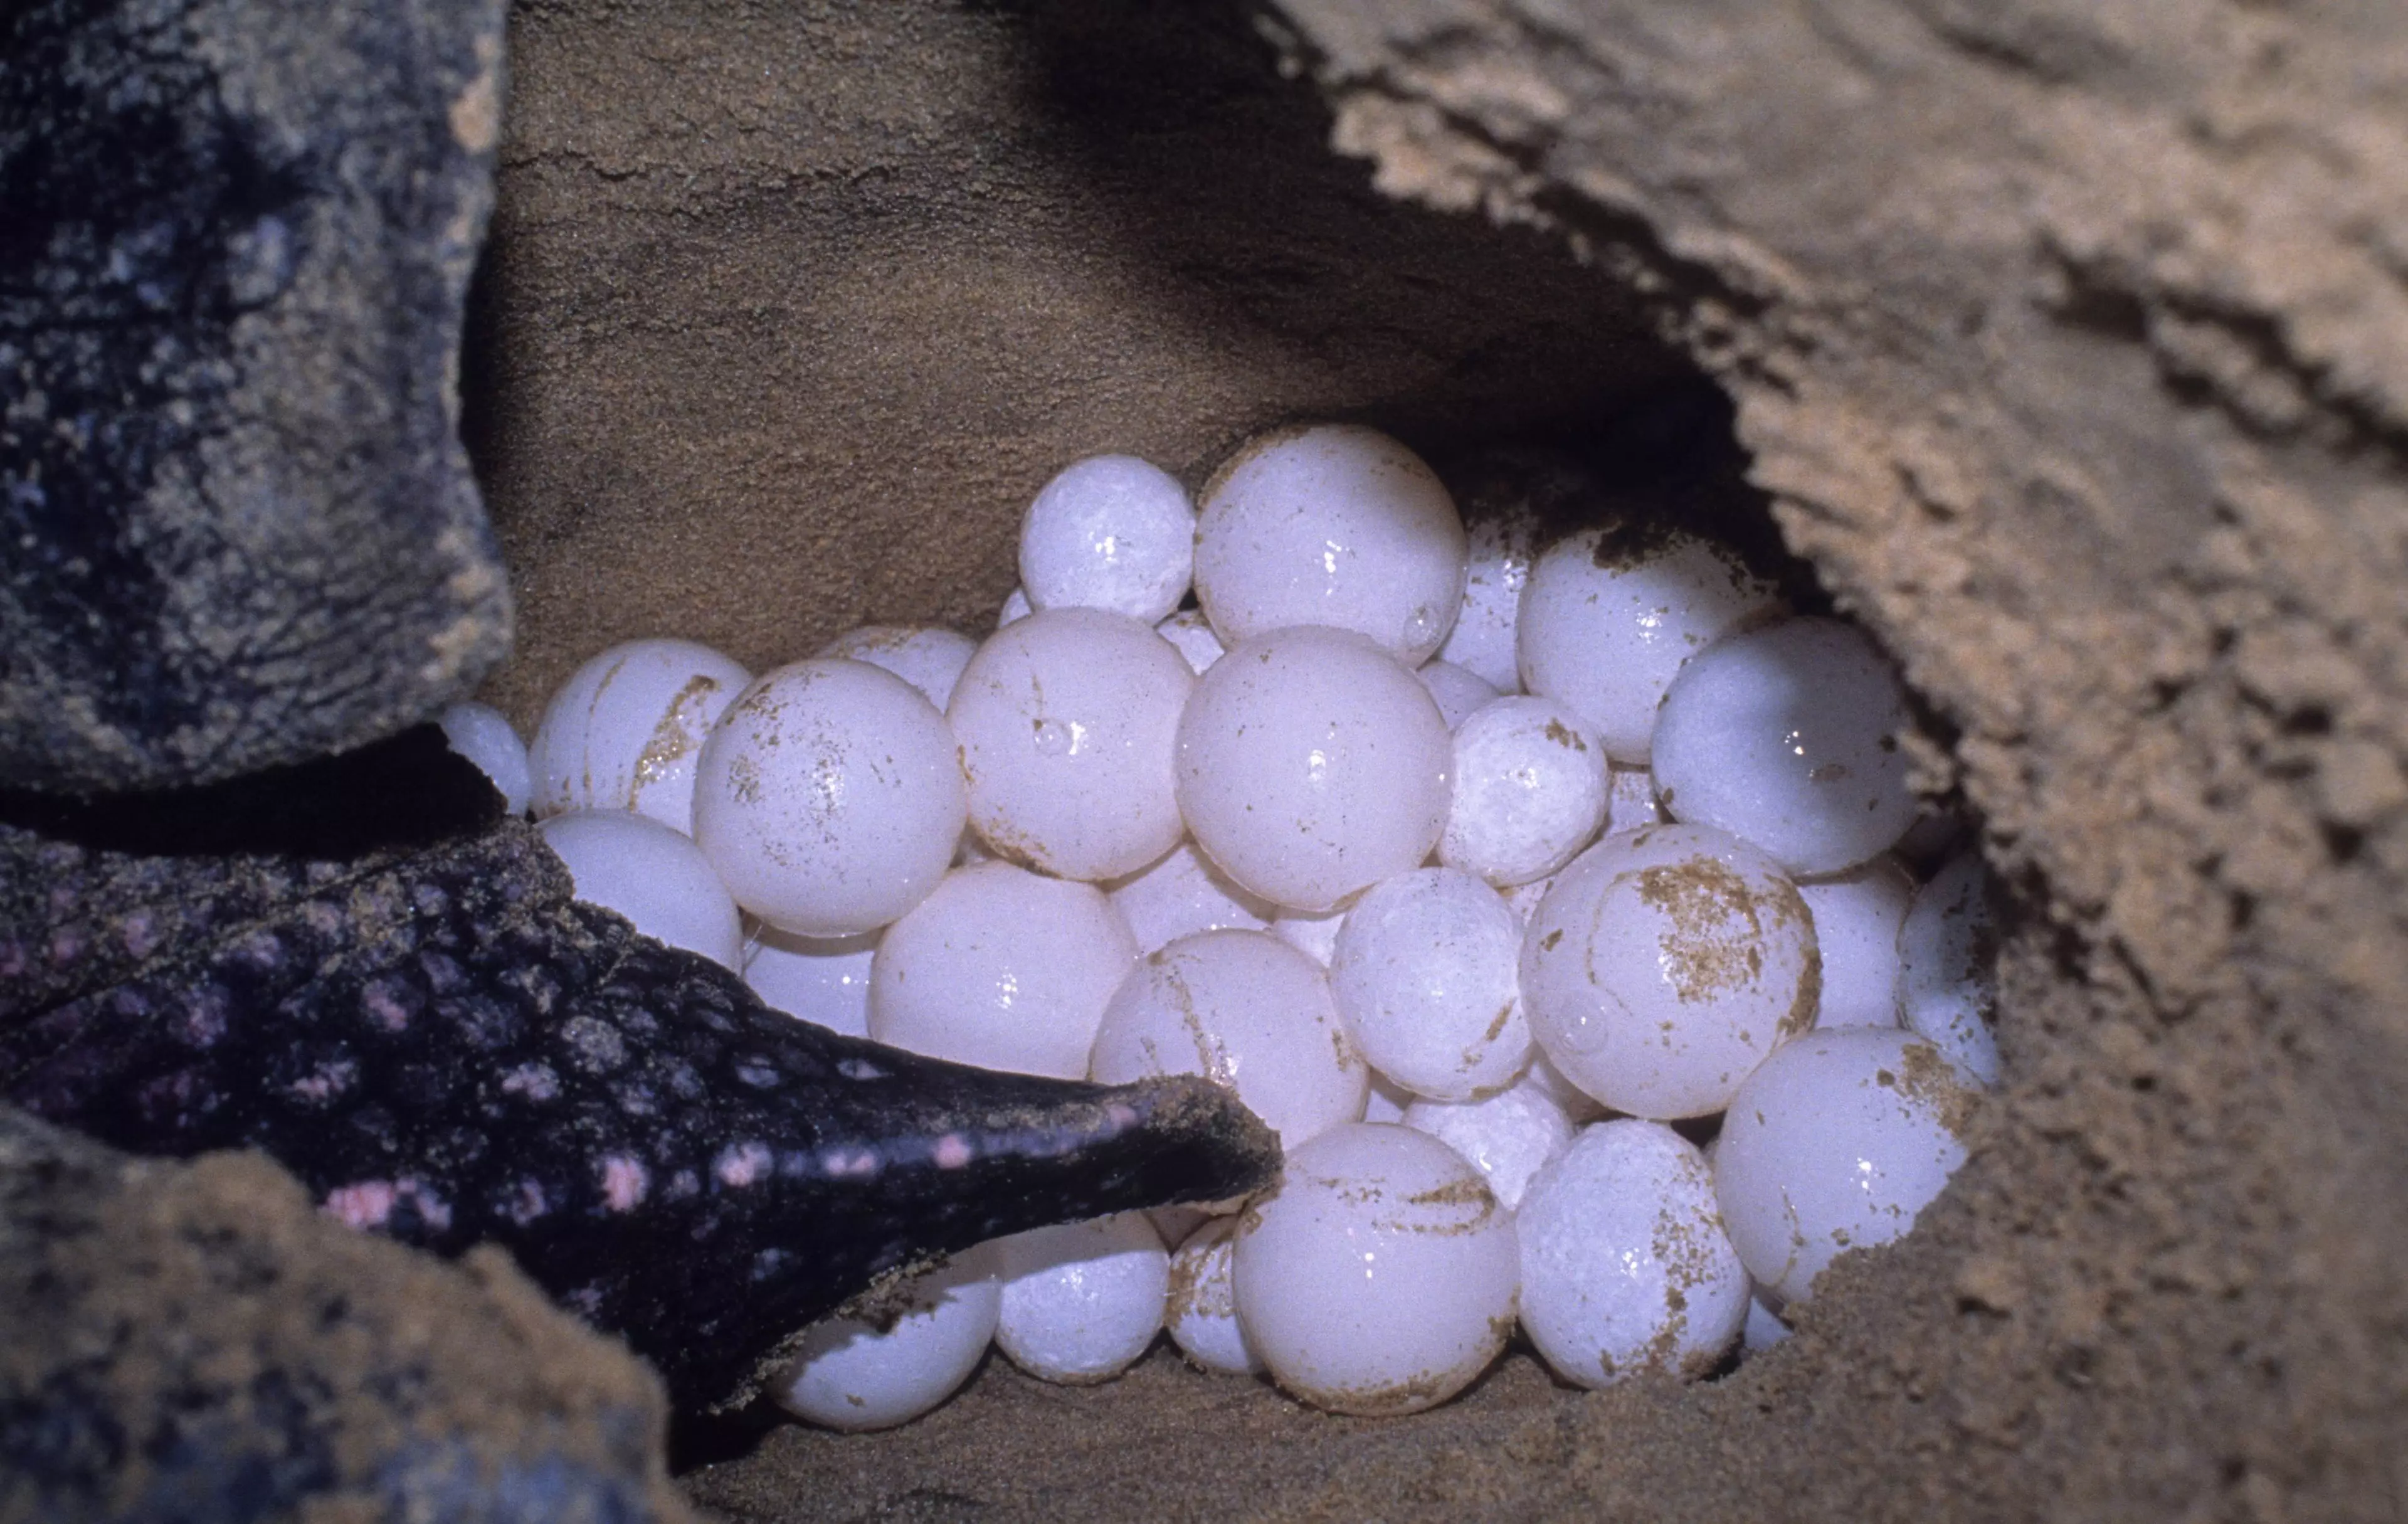 Rare Leatherback turtles have laid eggs in Phuket for the first time in five years.